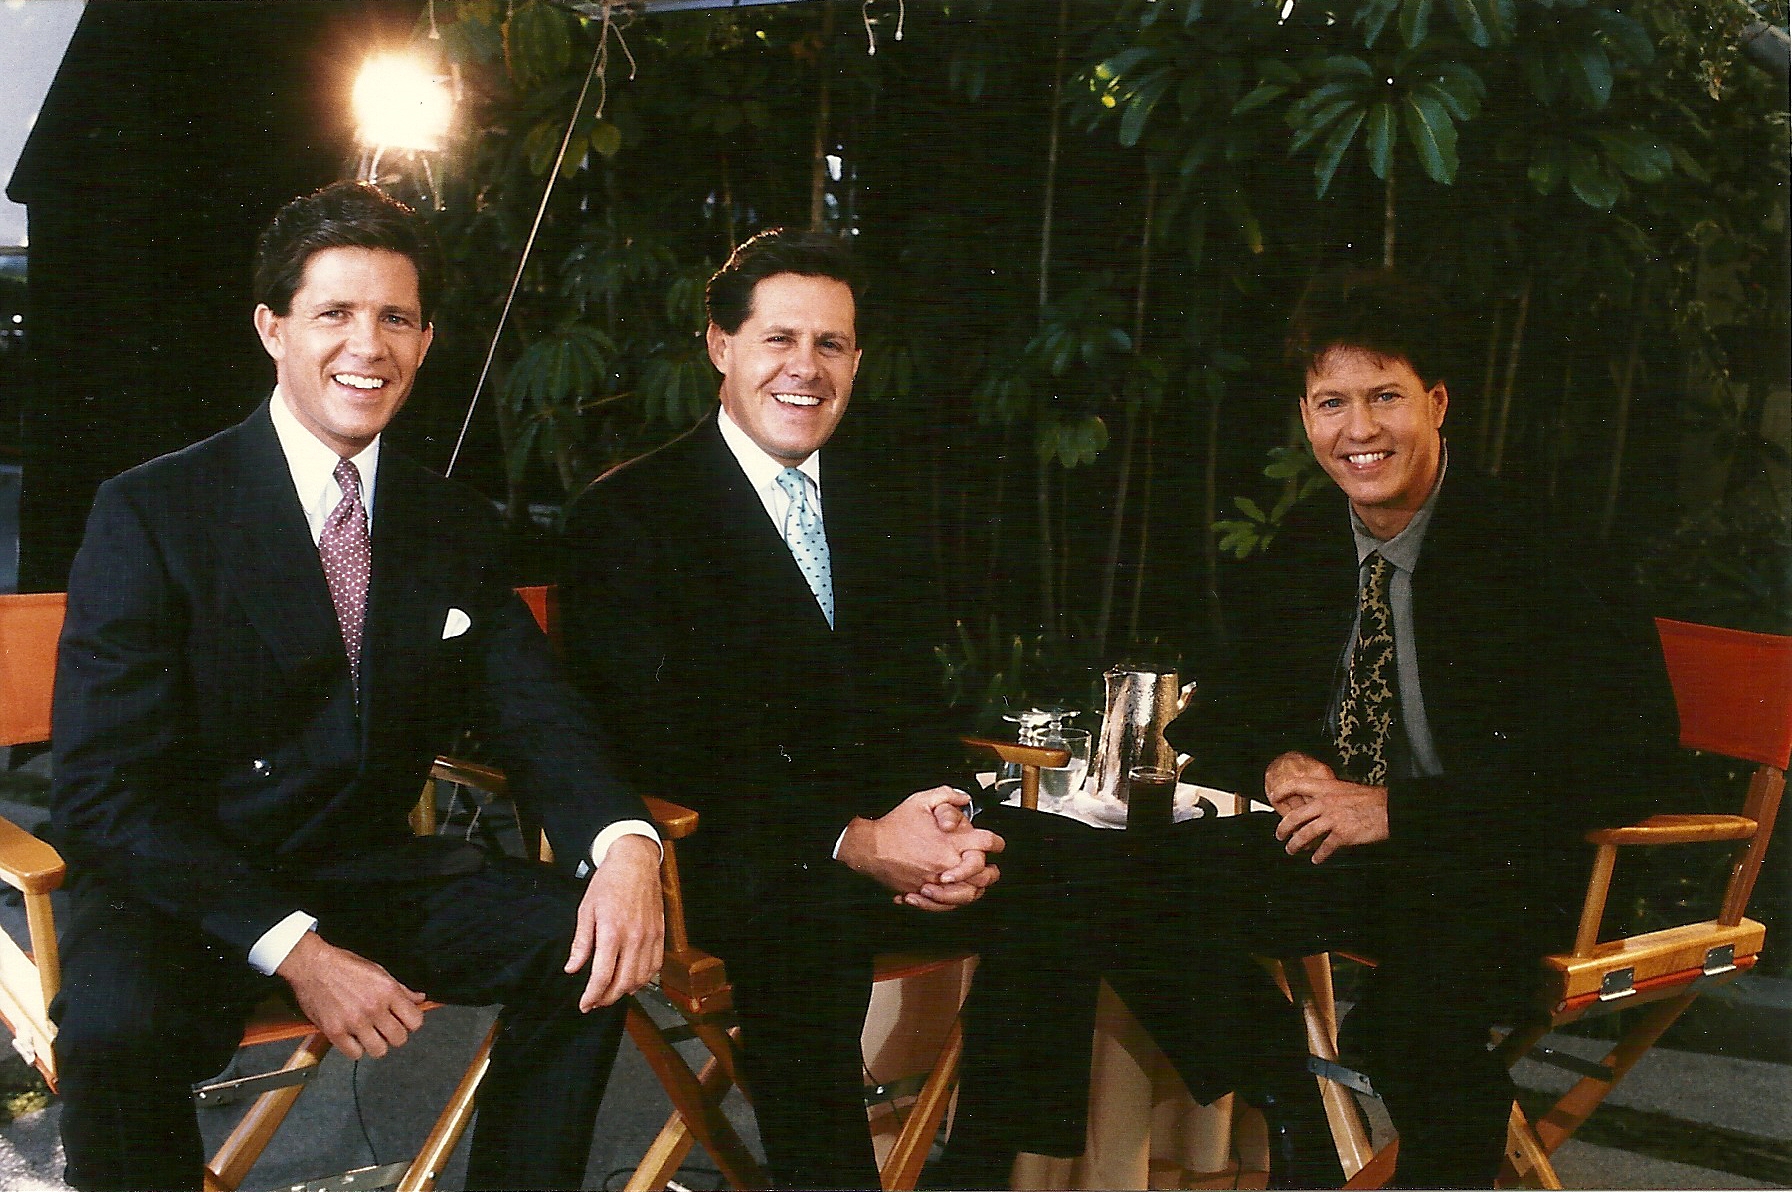 Butch Mccain, Ben McCain and Rick Dees after interview for Good Morning Oklahoma.